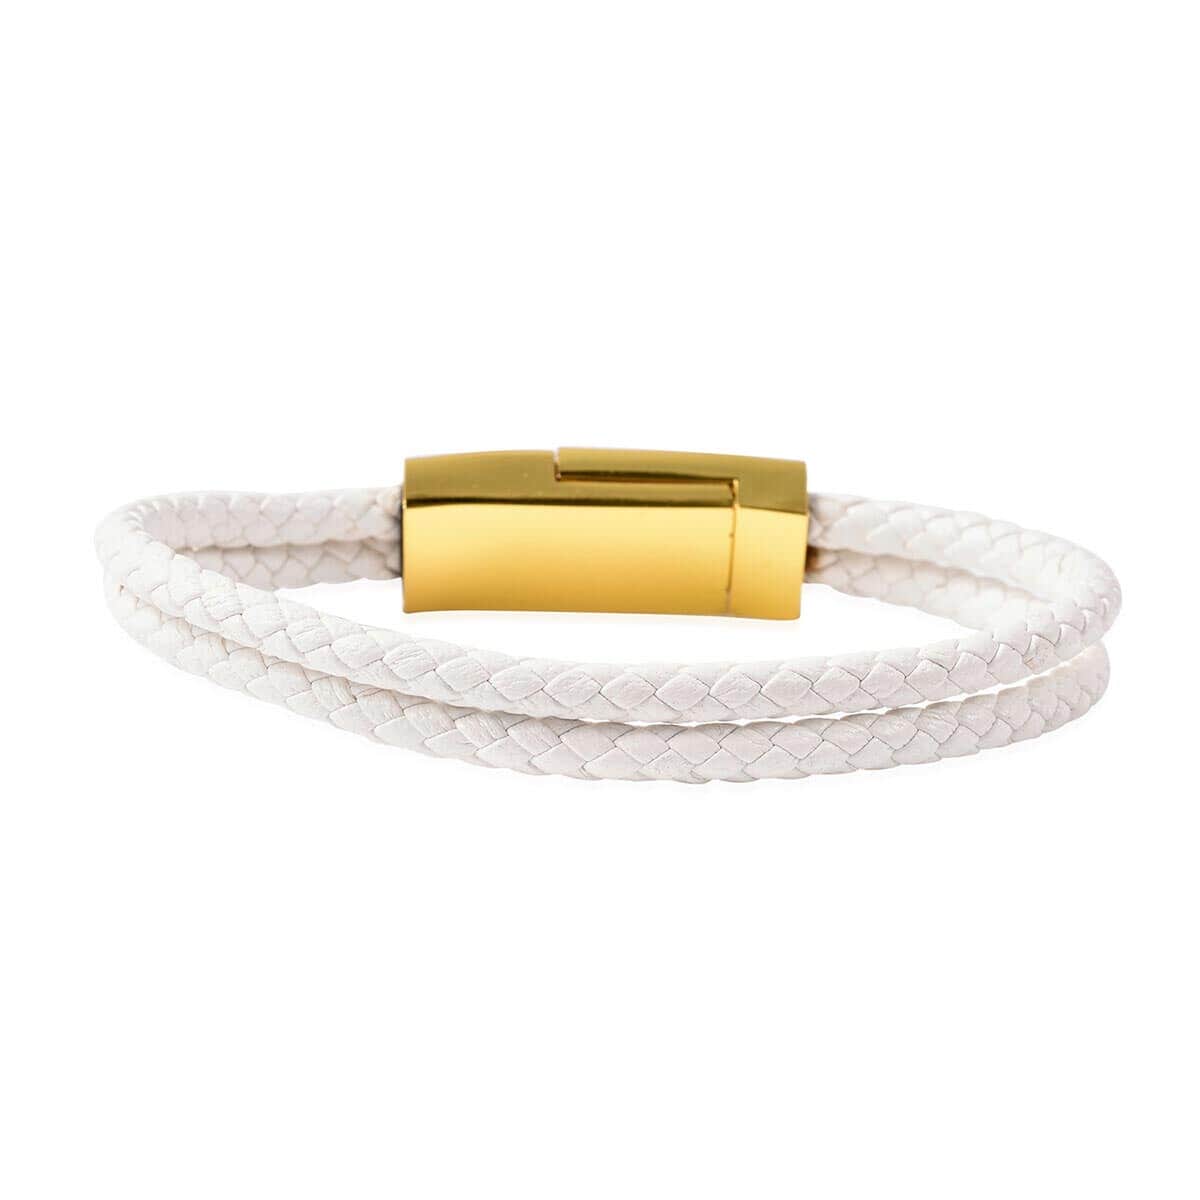 2 in 1 White Faux Leather Bracelet and USB Android Charger in Goldtone (7.50 In) image number 0